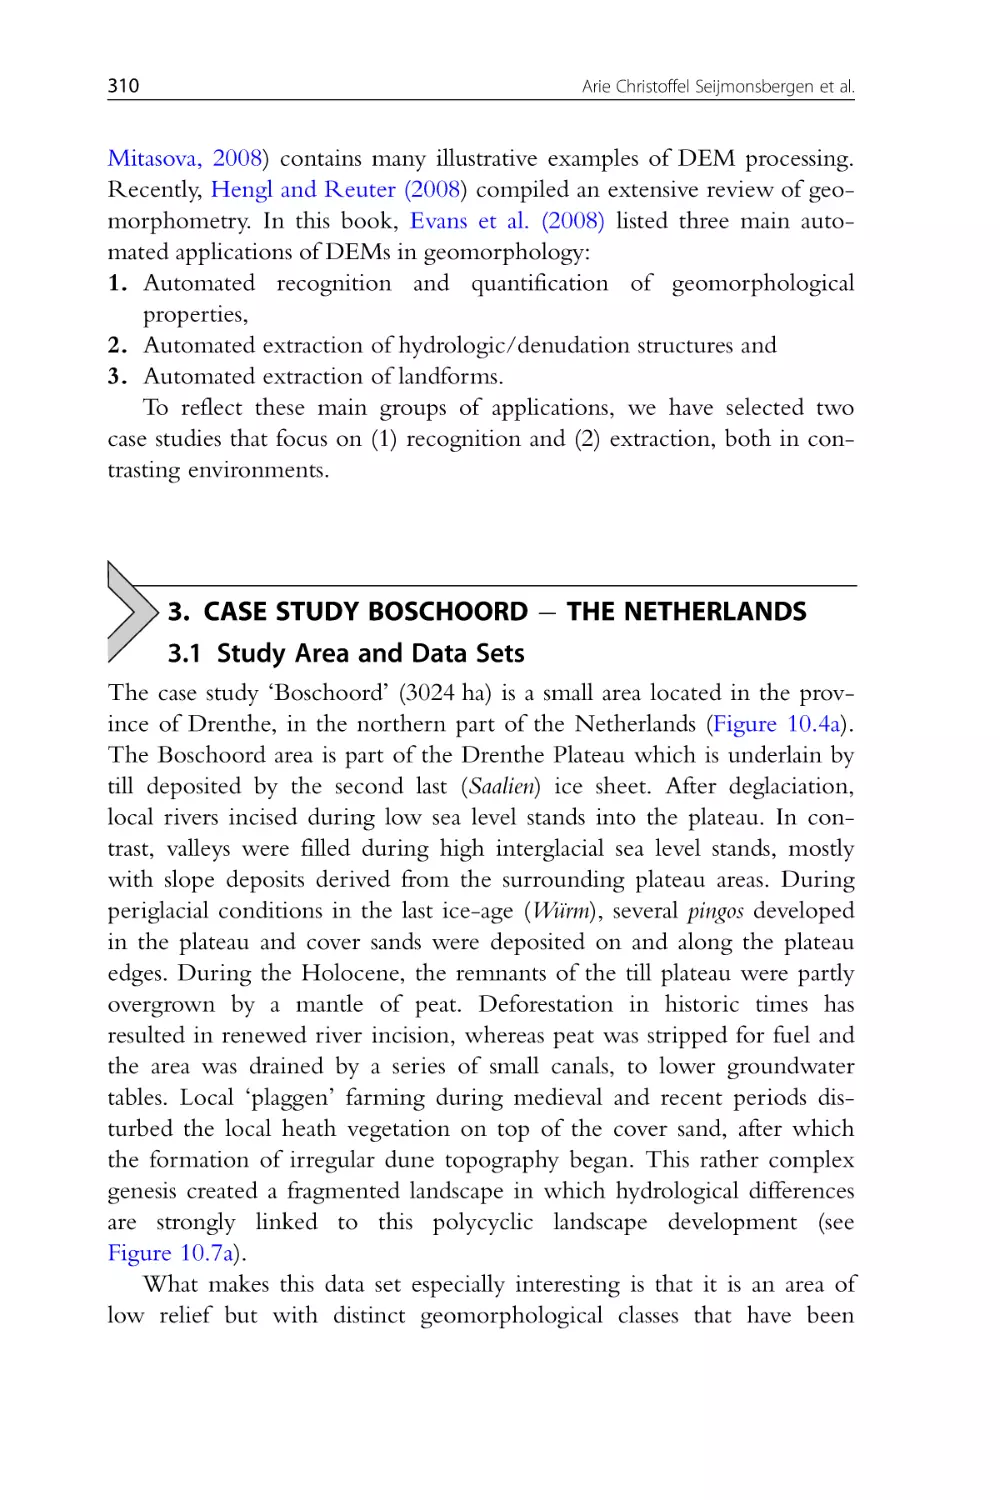 3. Case Study Boschoord – The Netherlands
3.1 Study Area and Data Sets